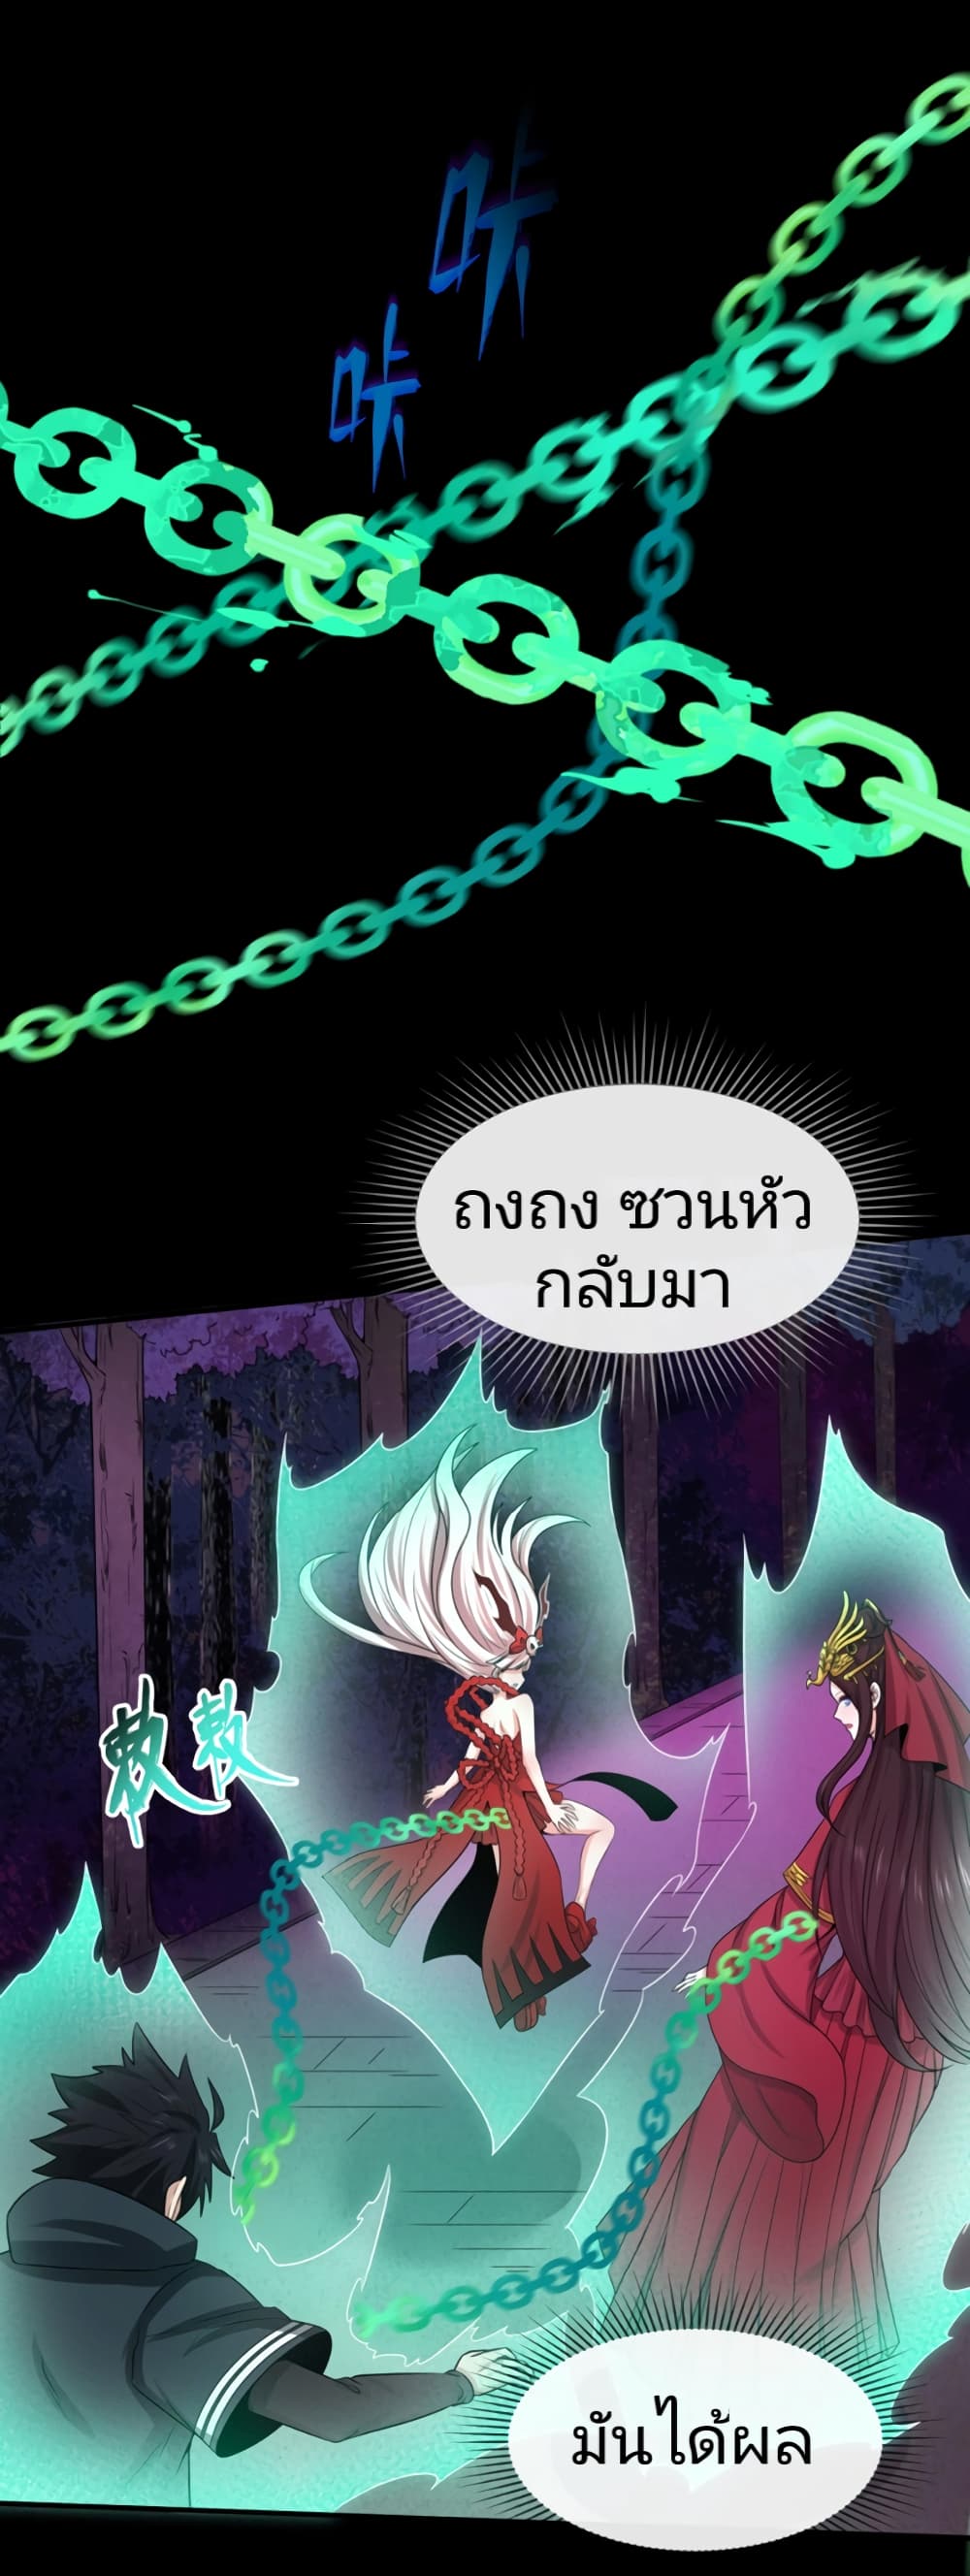 The Age of Ghost Spirits à¸à¸­à¸à¸à¸µà¹ 43 (22)